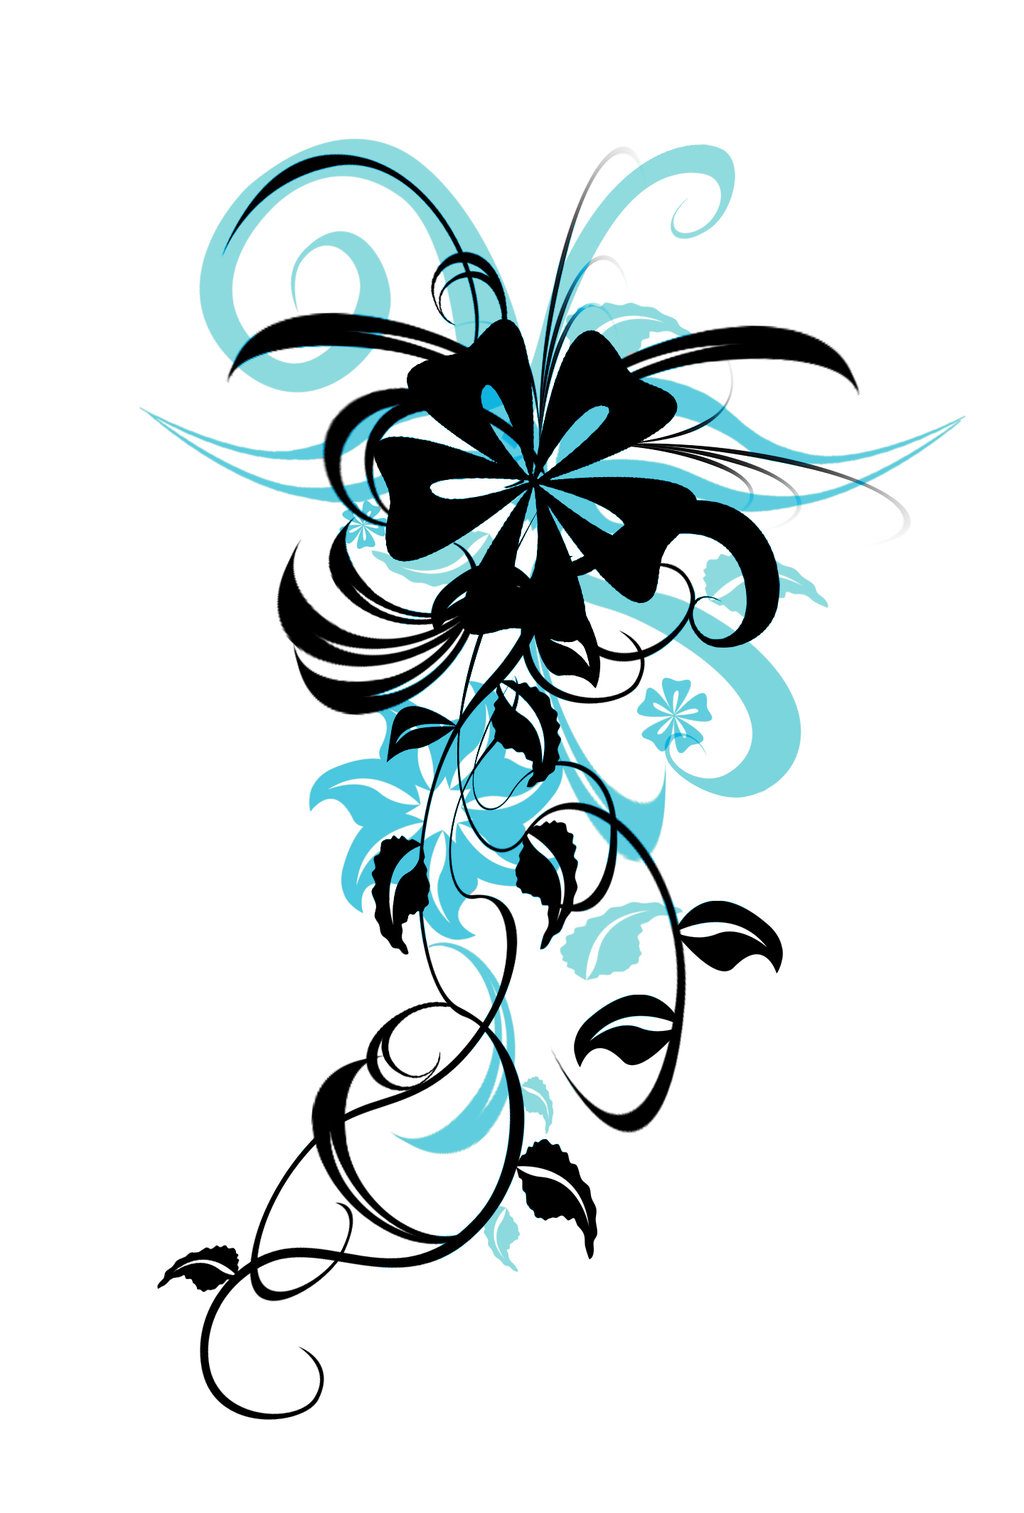 Flower tattoo by Pittyputty on Clipart library